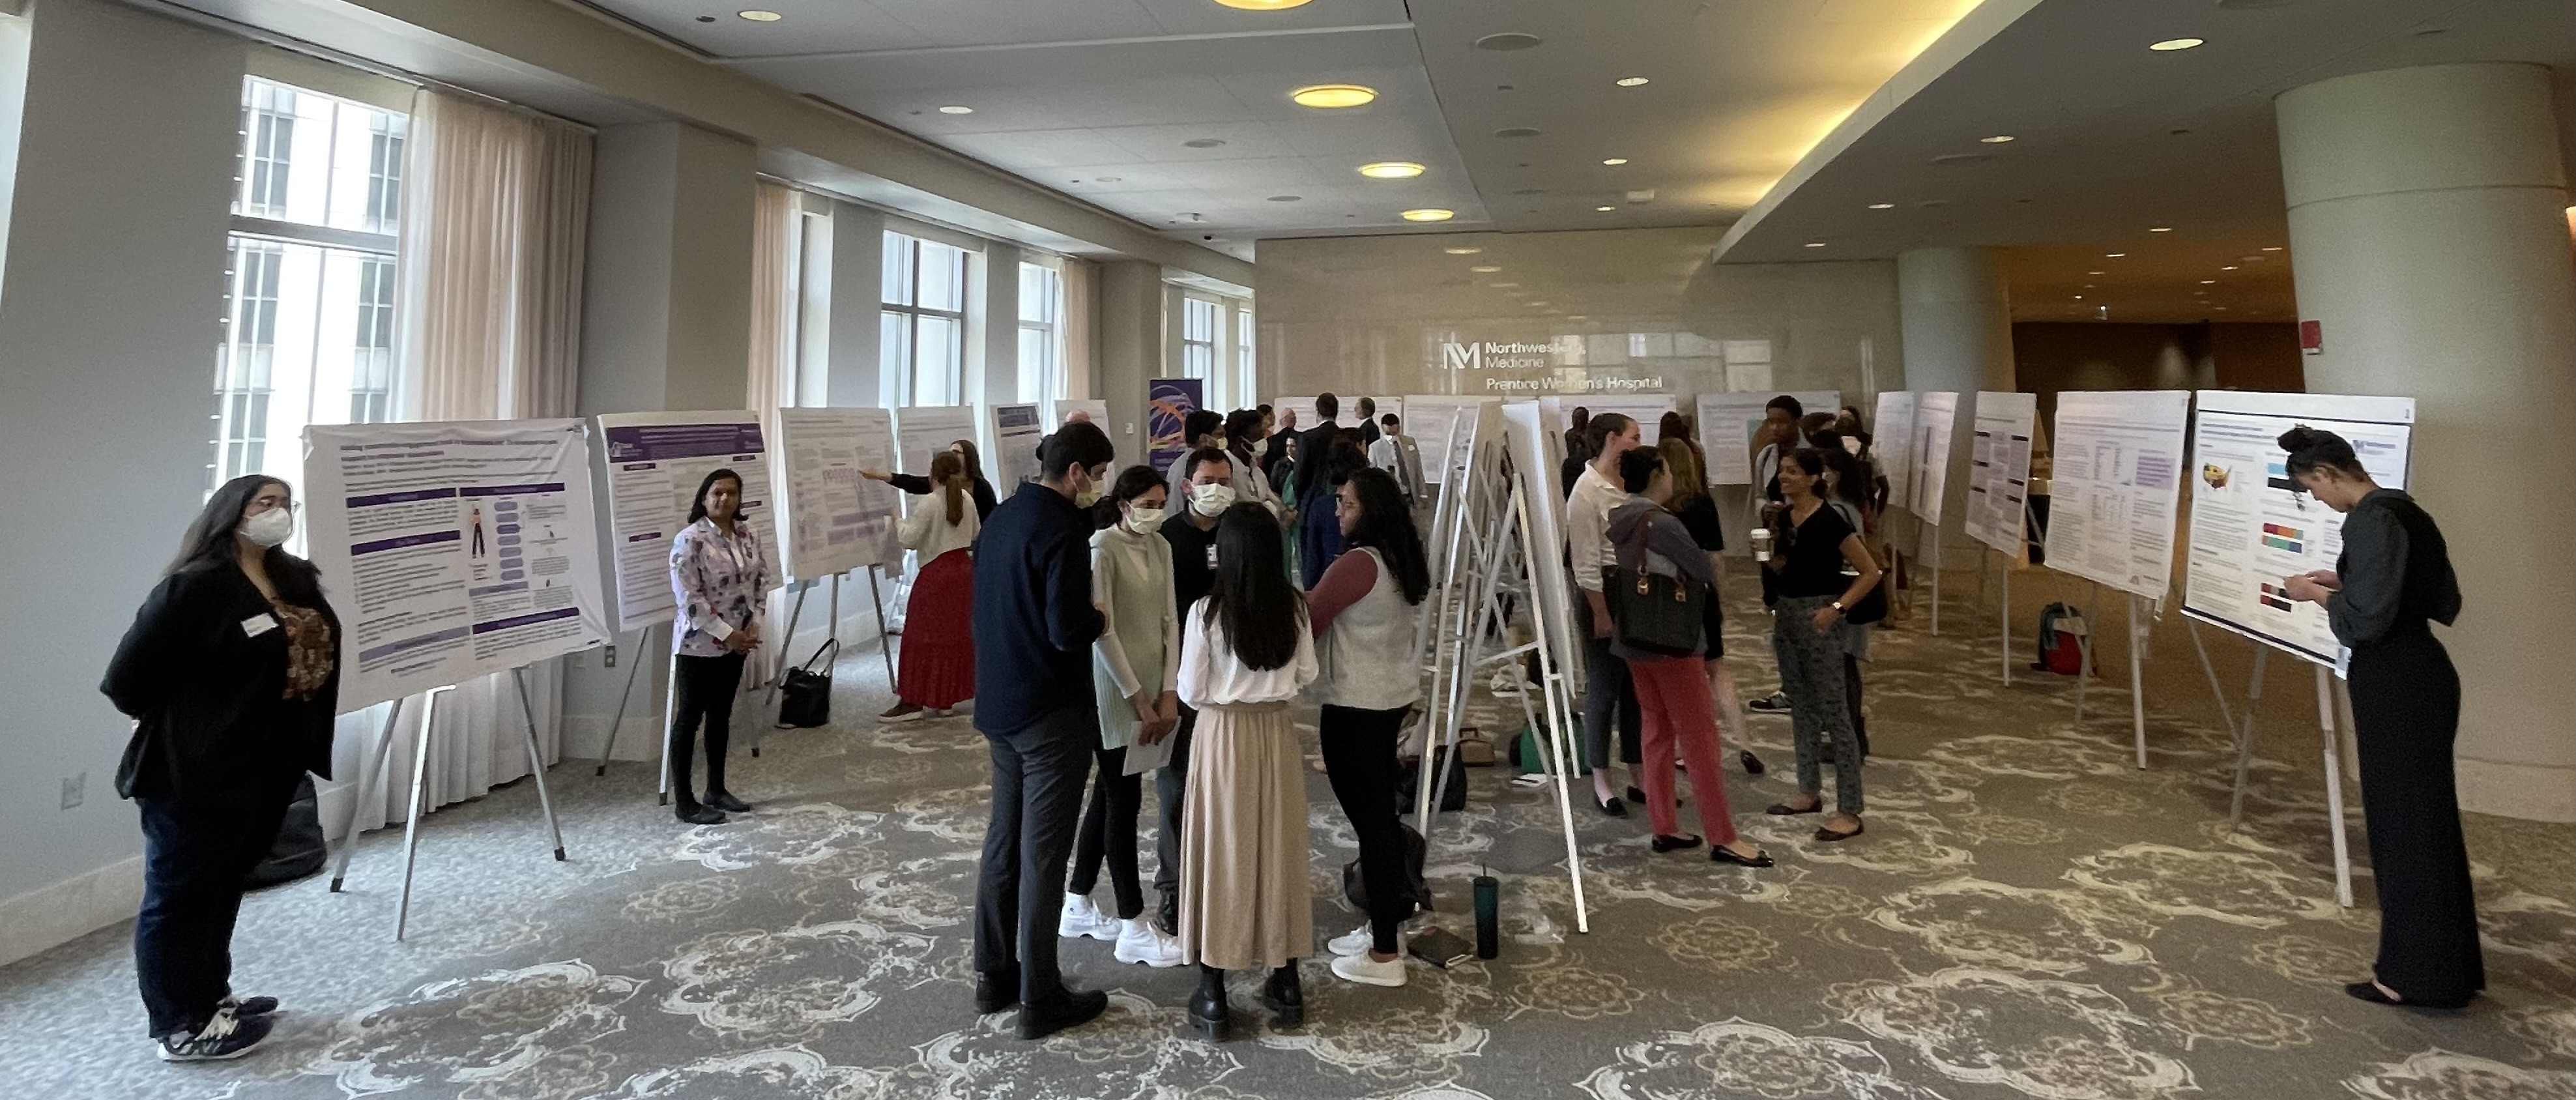 Global Health Education Day Poster Presentations